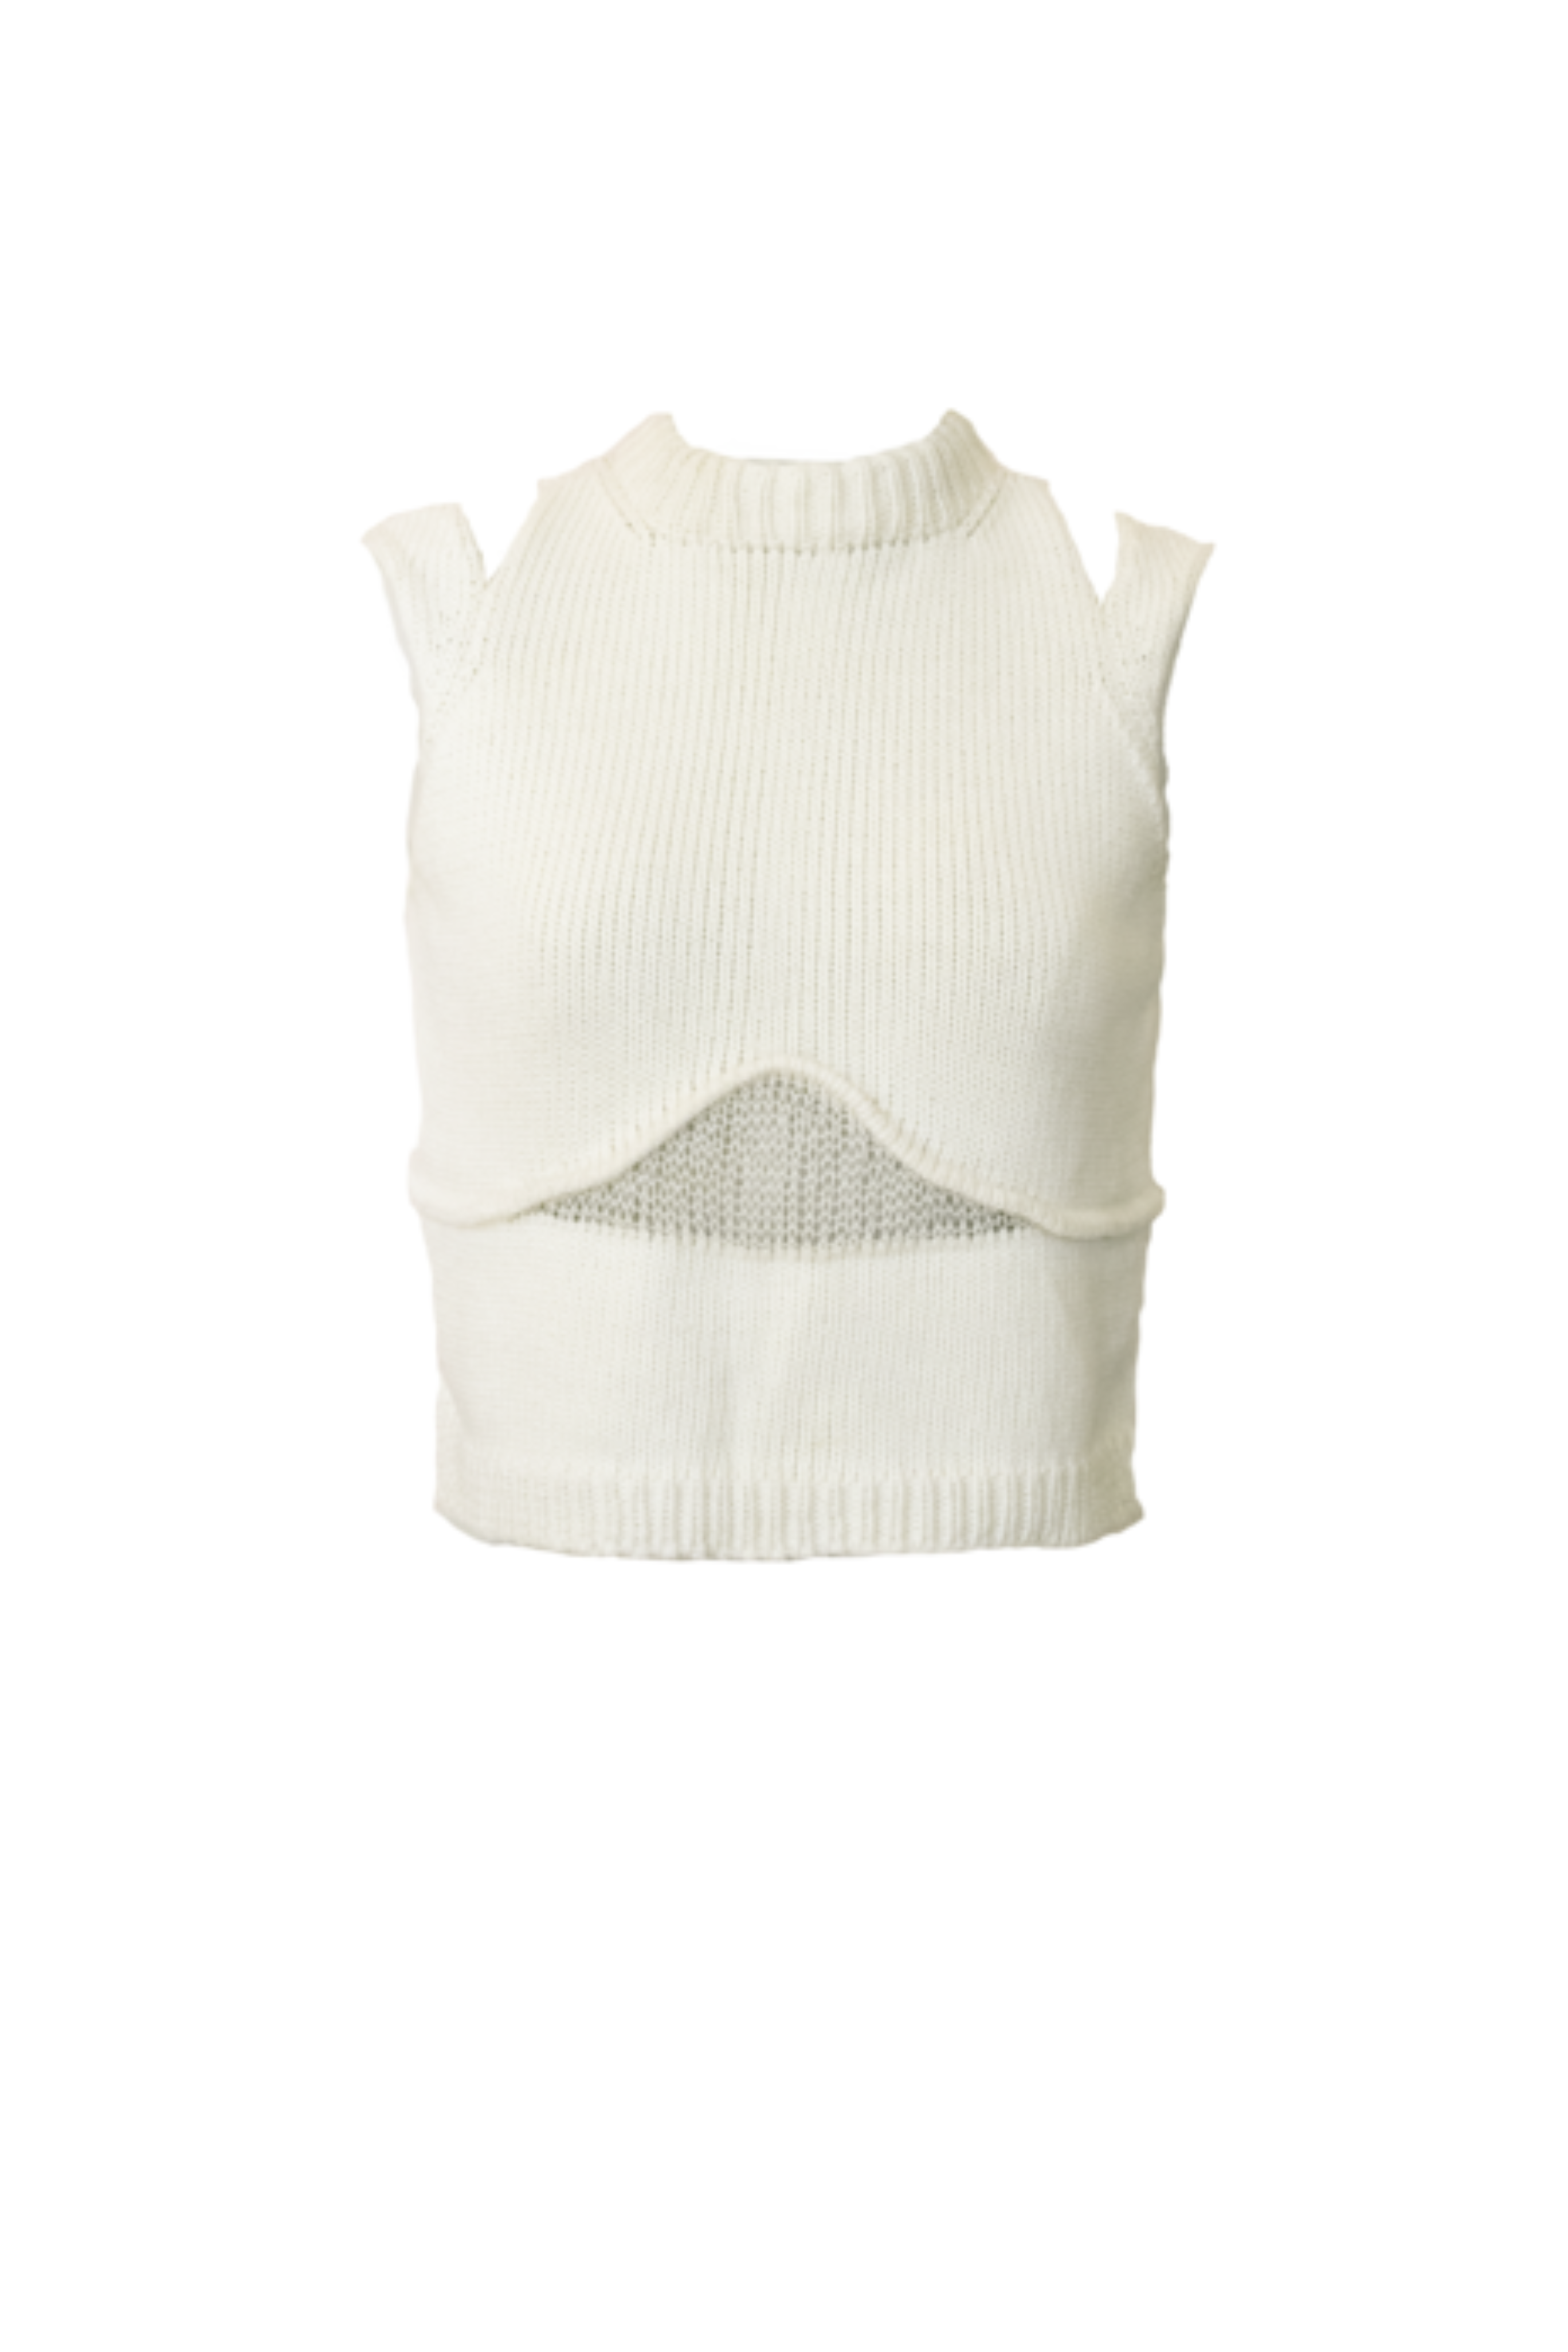 AISLING CAMPS Steph Knit Crop Top 